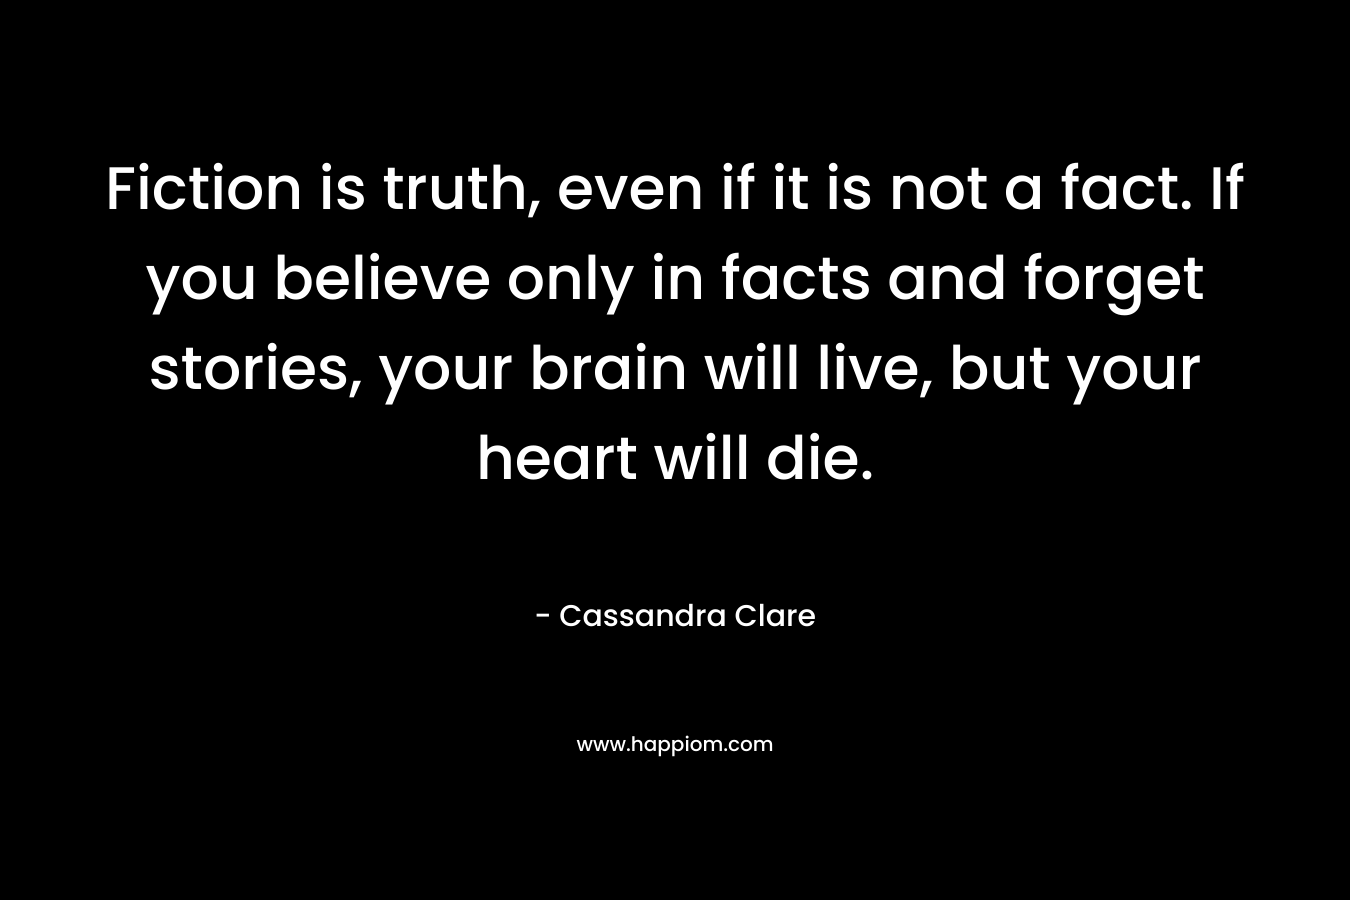 Fiction is truth, even if it is not a fact. If you believe only in facts and forget stories, your brain will live, but your heart will die.